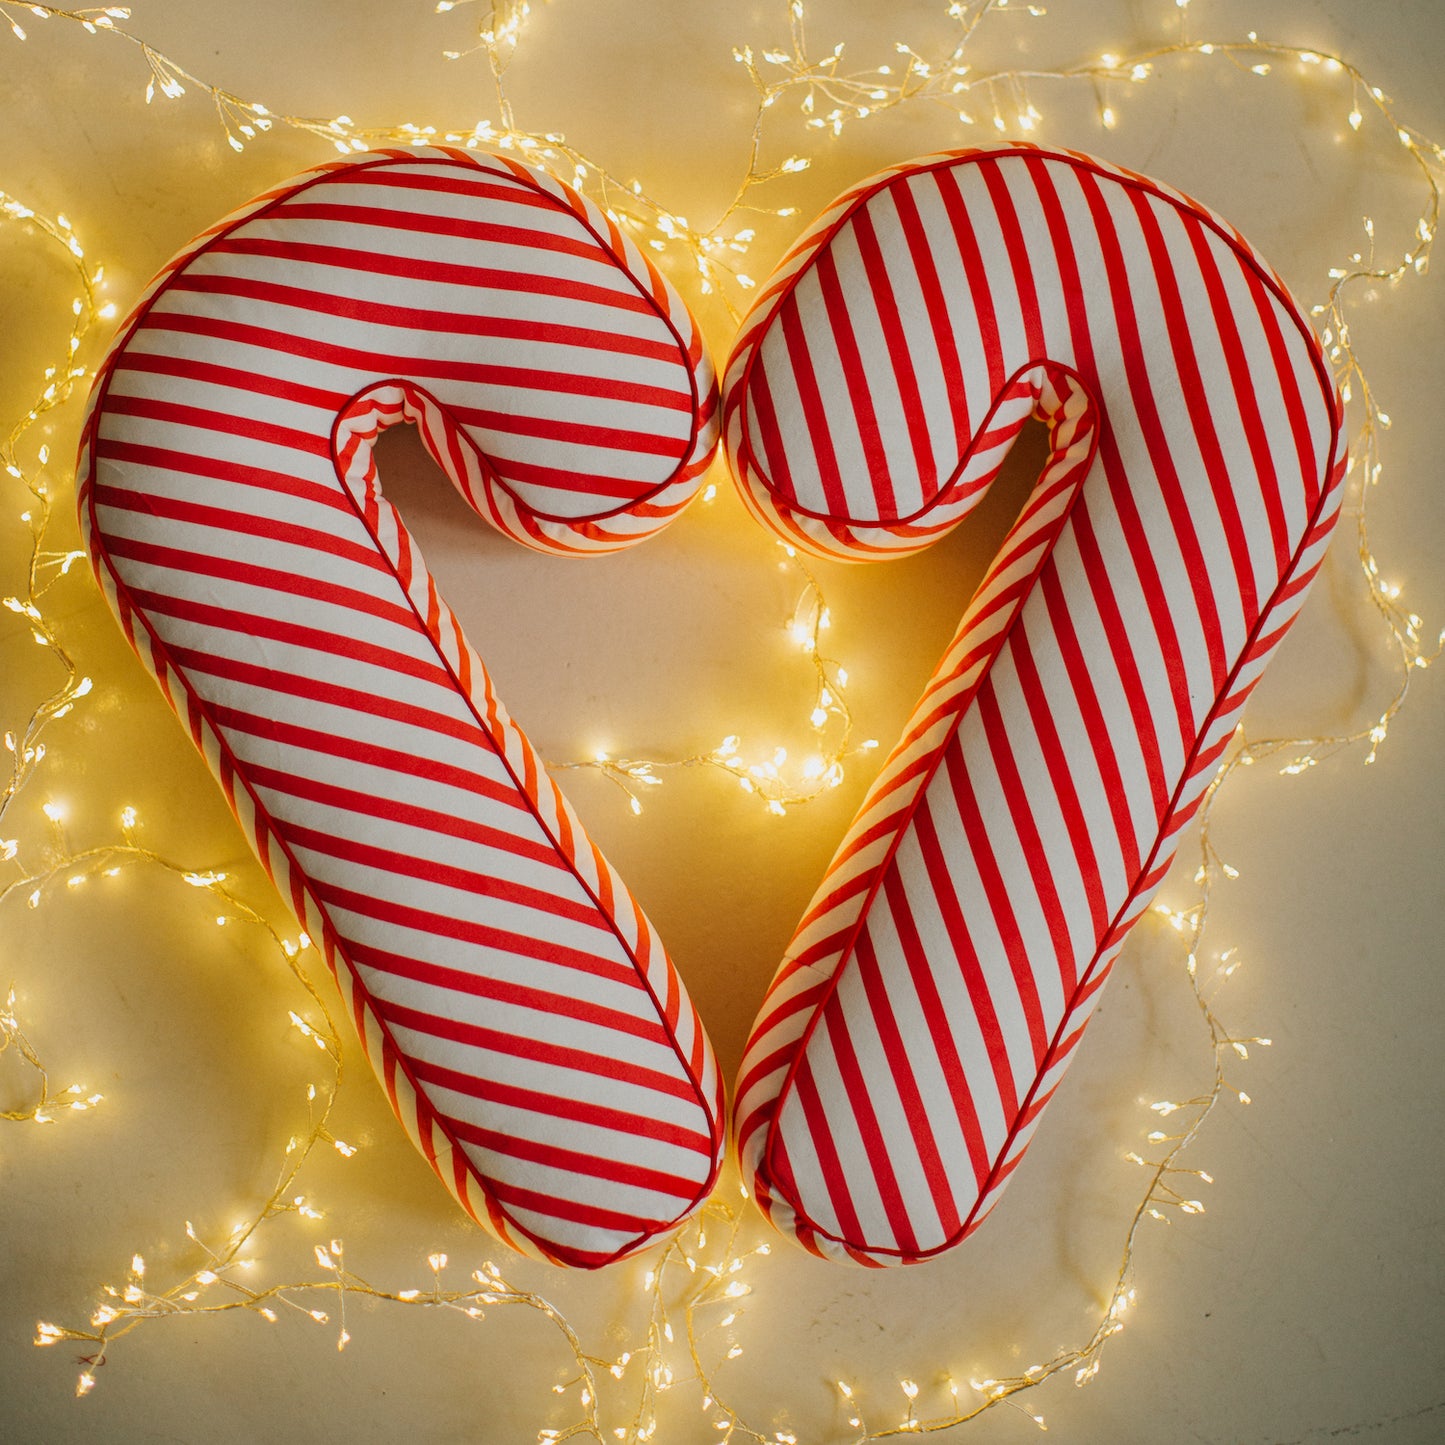 Christmas candy cane cushion red stripes by bettys home arranged in the shape of a heart among the Christmas lights